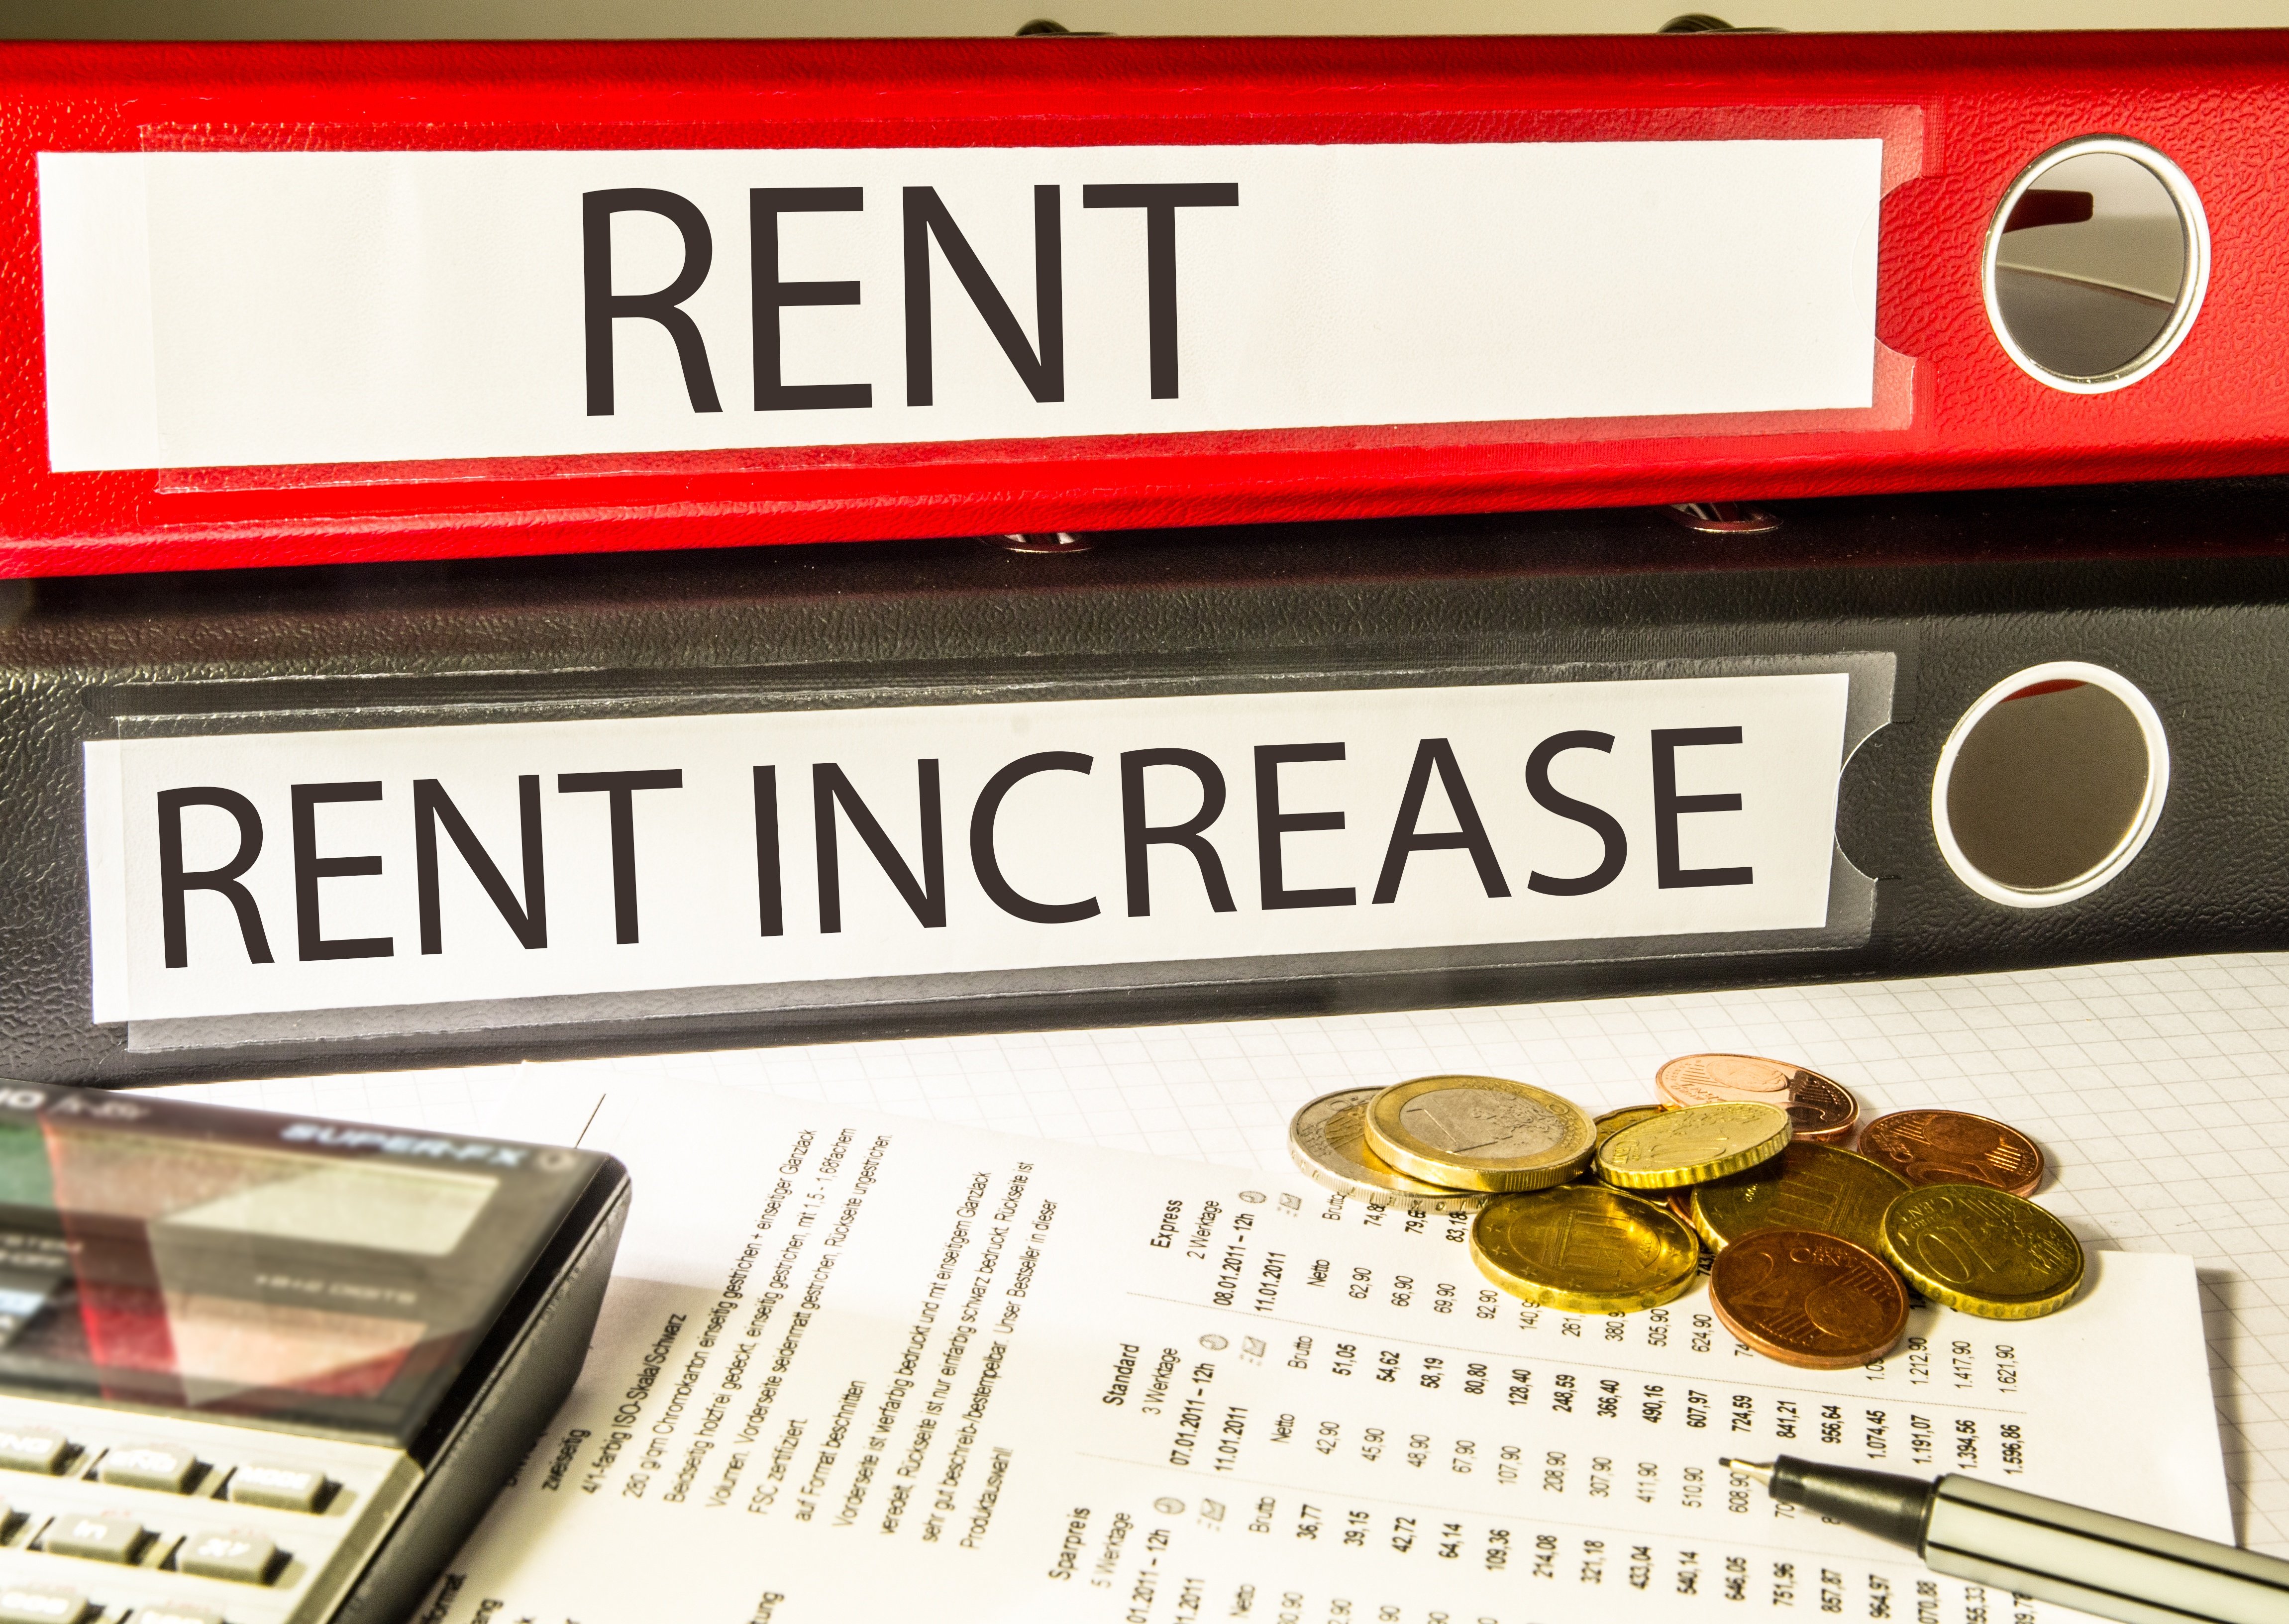 Raise The Rent Or End The Lease Agreement?